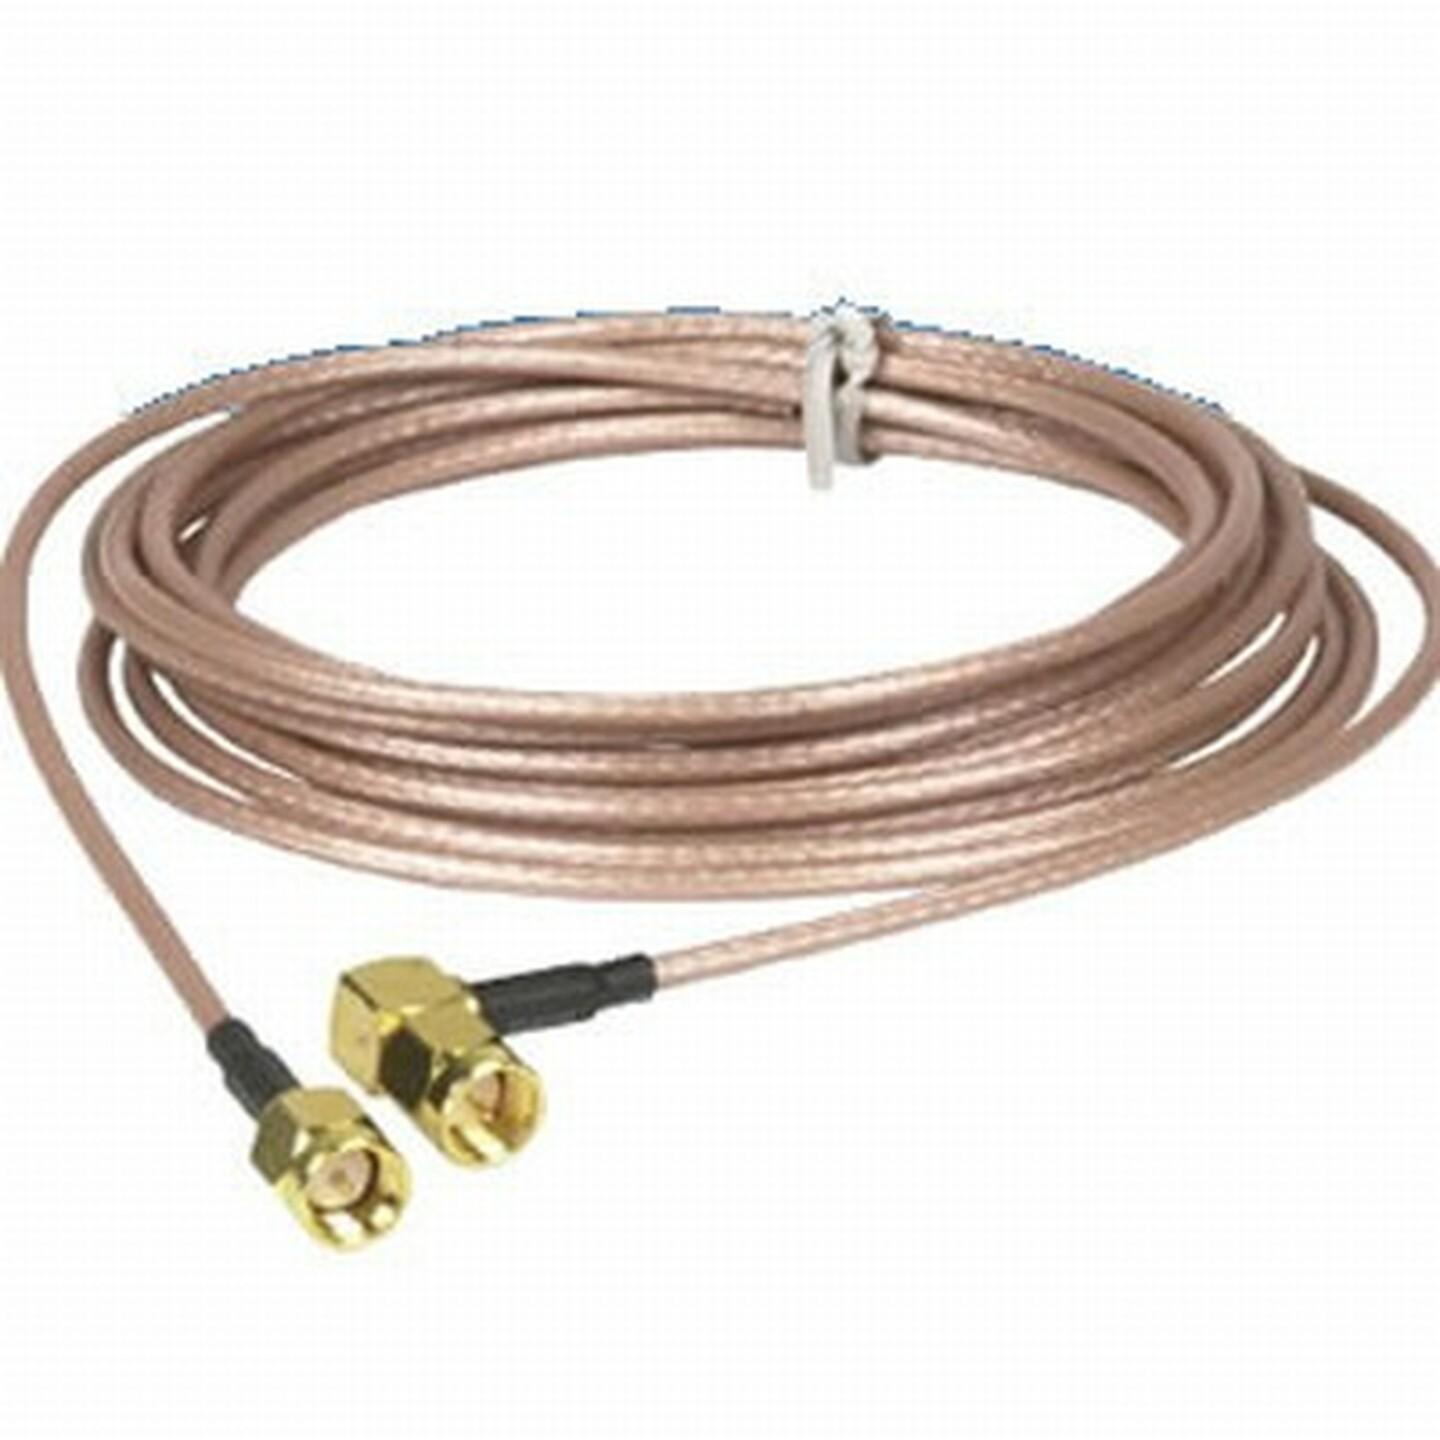 5m SMA Coaxial Cable